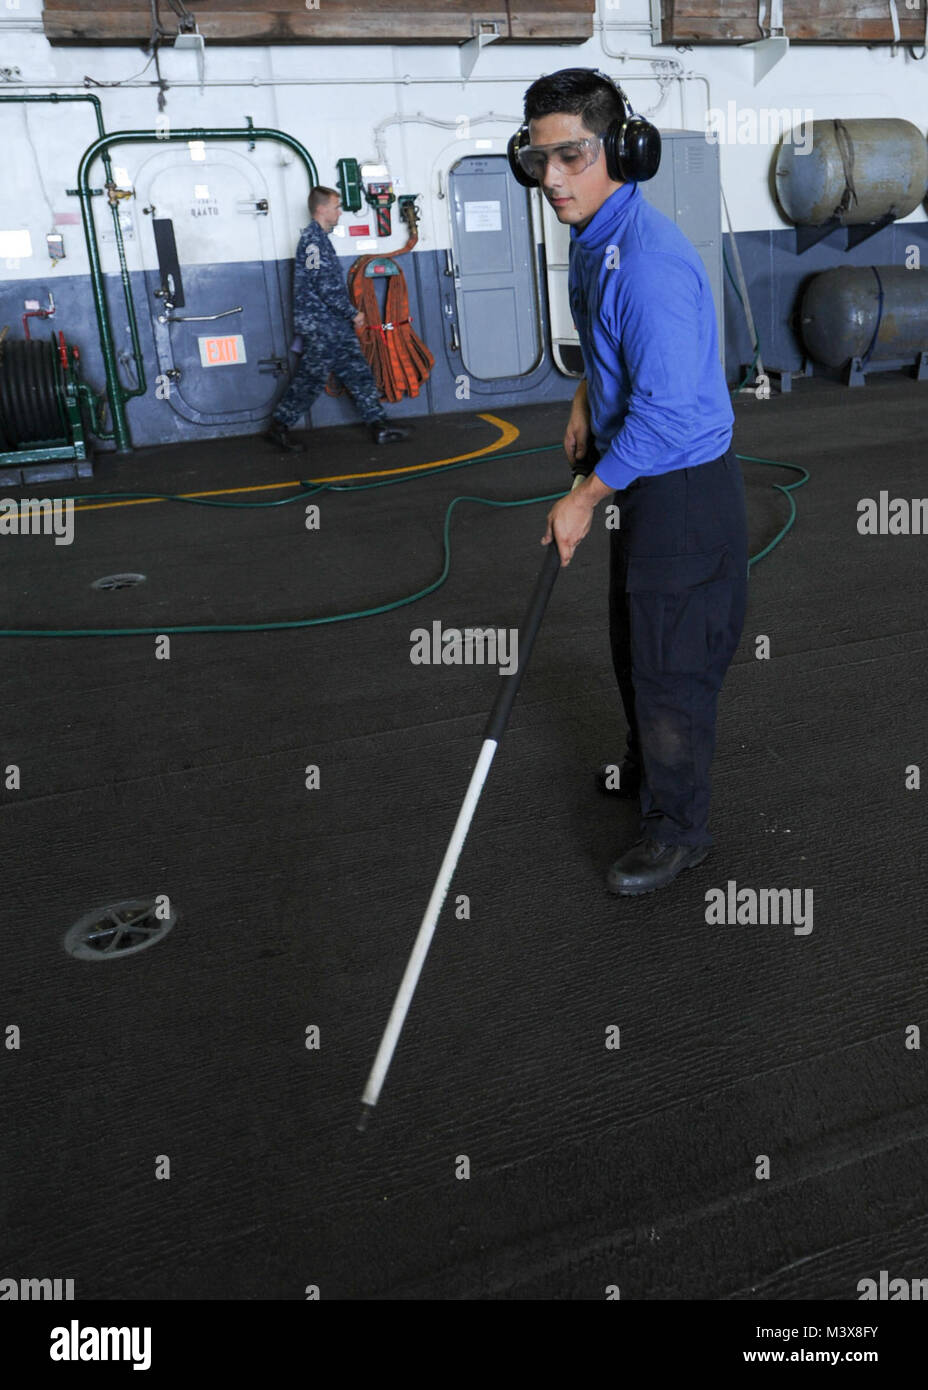 PACIFIC OCEAN (July 19, 2014) Aviation Boatswain’s Mate (Handling) Airman Cesar J. Martinez, of Anaheim, Calif., uses an air hose to clean the hangar bay of the aircraft carrier USS Nimitz (CVN 68). Nimitz is currently underway conducting carrier qualifications. (U.S. Navy photo by Mass Communication Specialist 3rd Class Linda S. Swearingen/Released) 140719-N-BJ752-055.jpg by USS NIMITZ (CVN 68) Stock Photo